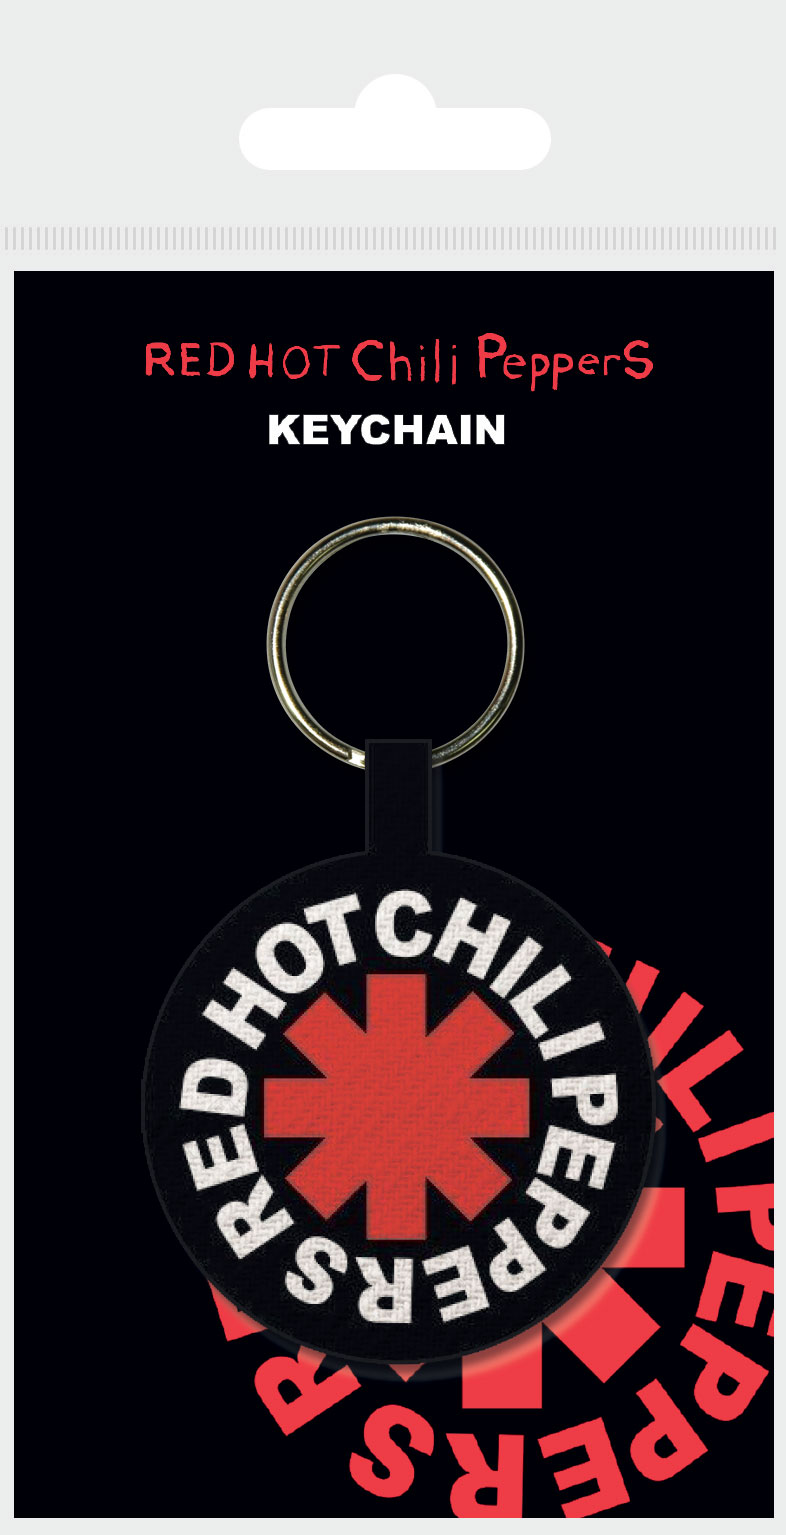 RED HOT CHILLI PEPPERS – LOGO (WOVEN KEYCHAIN)